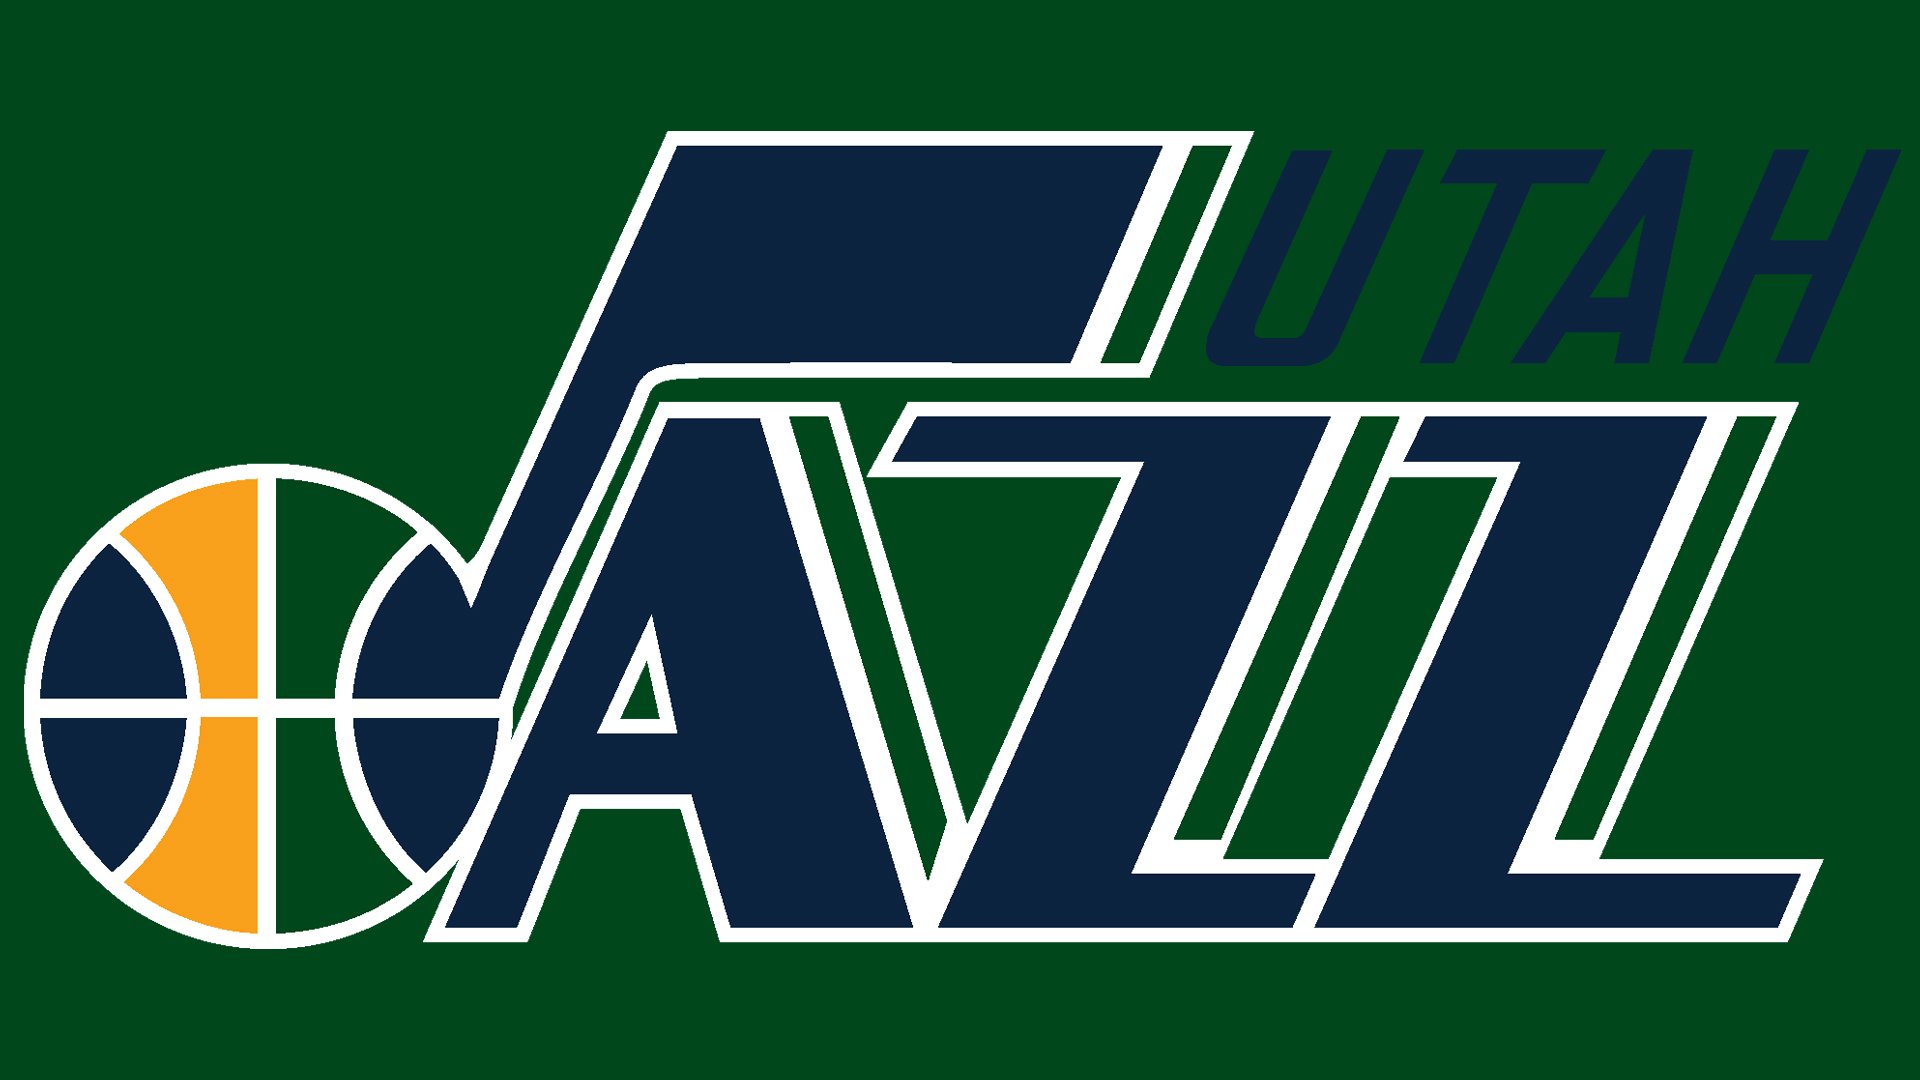 Meaning Utah Jazz logo and symbol | history and evolution1920 x 1080